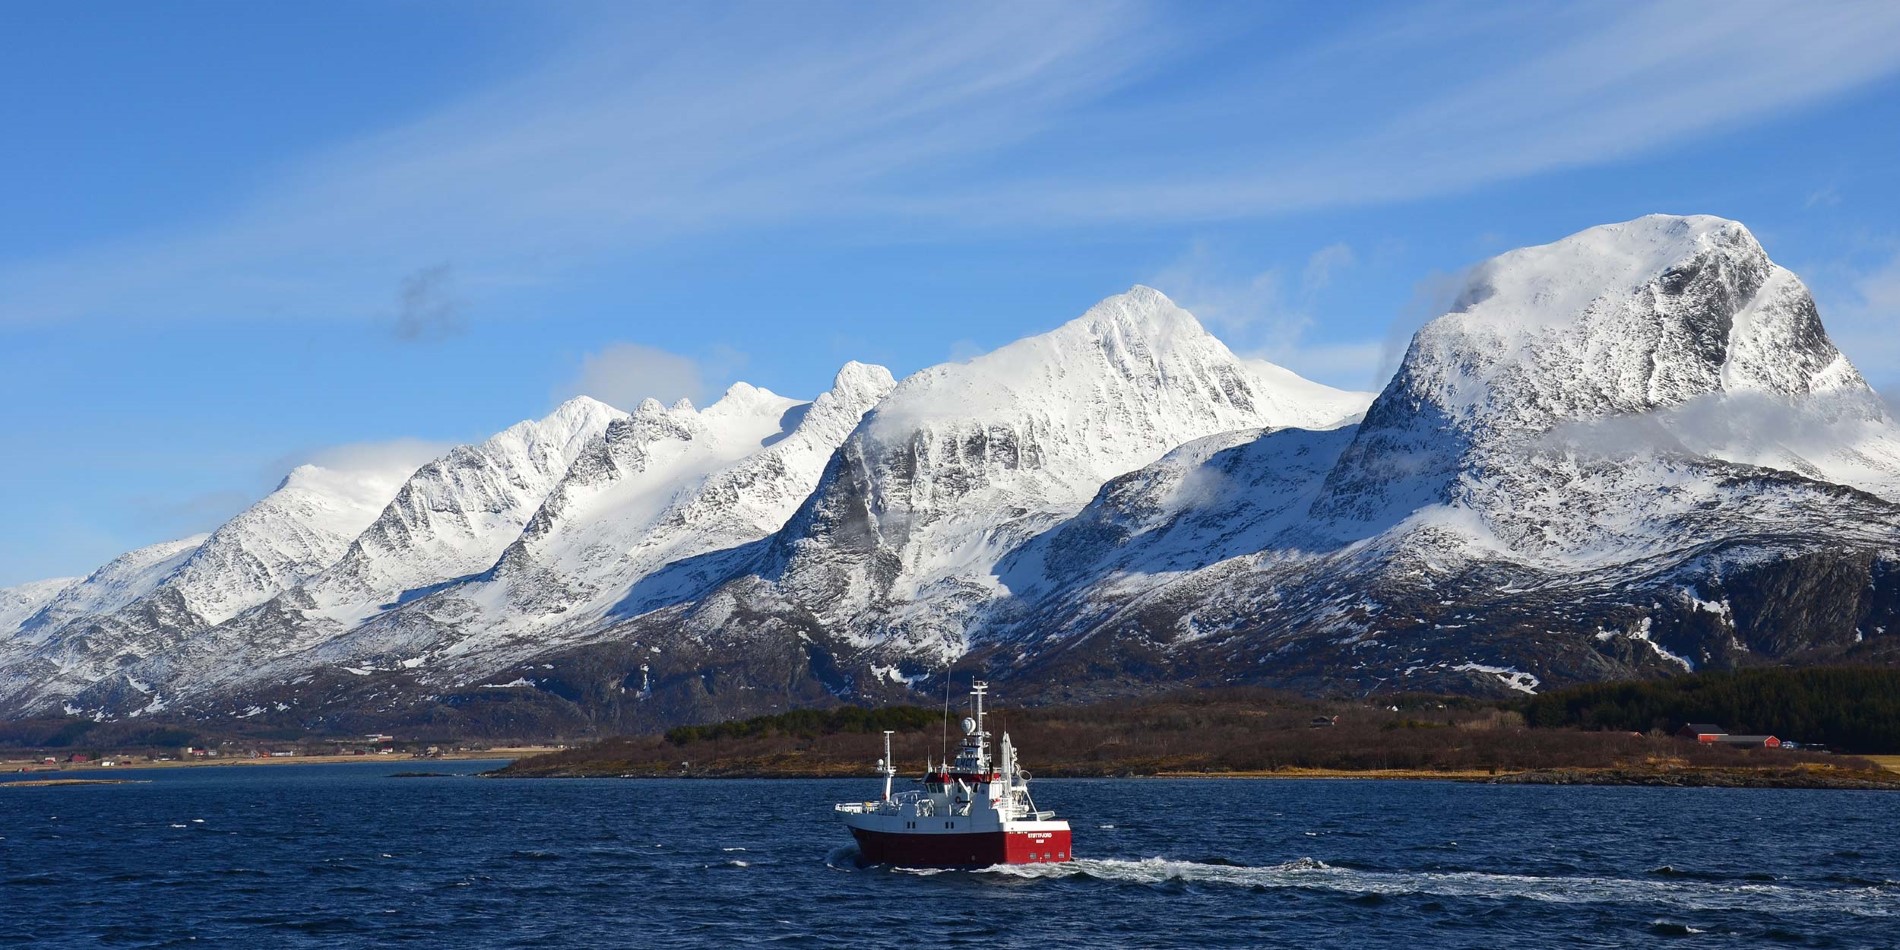 A fishing boat in front of the Seven Sisters mountain chain